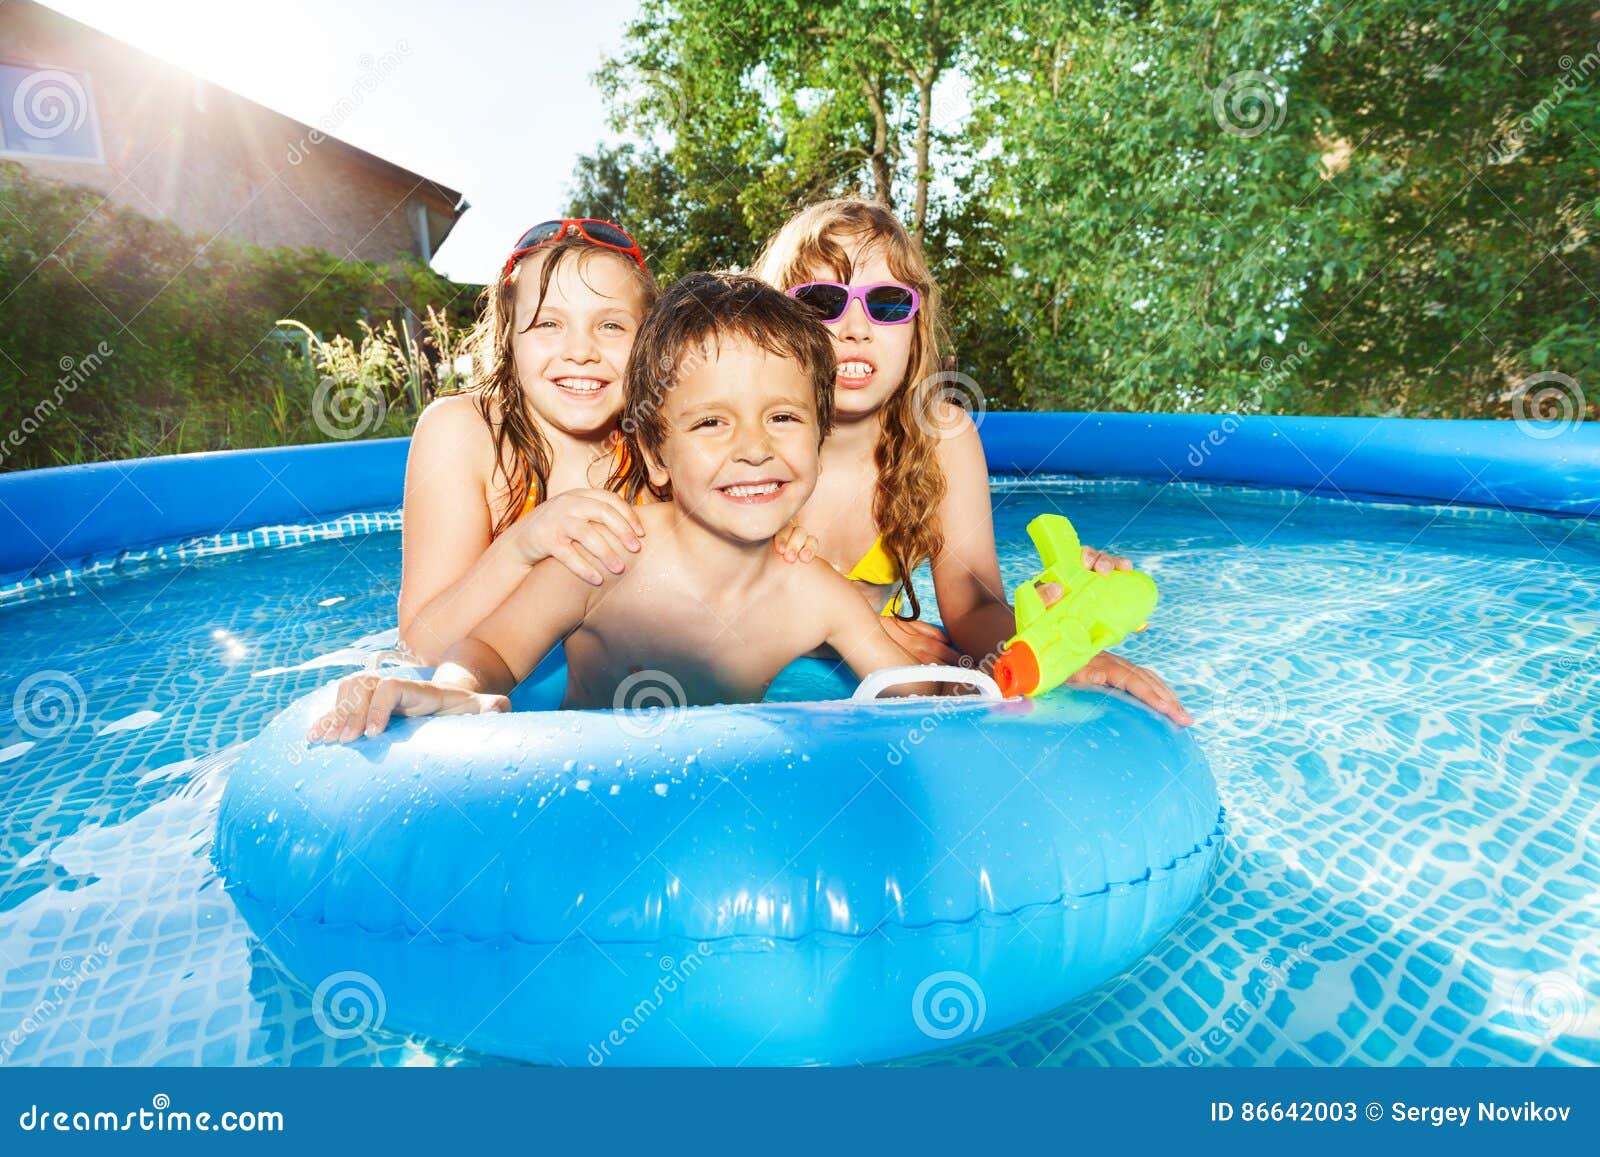 happy kids swimming in the pool with rubber ring